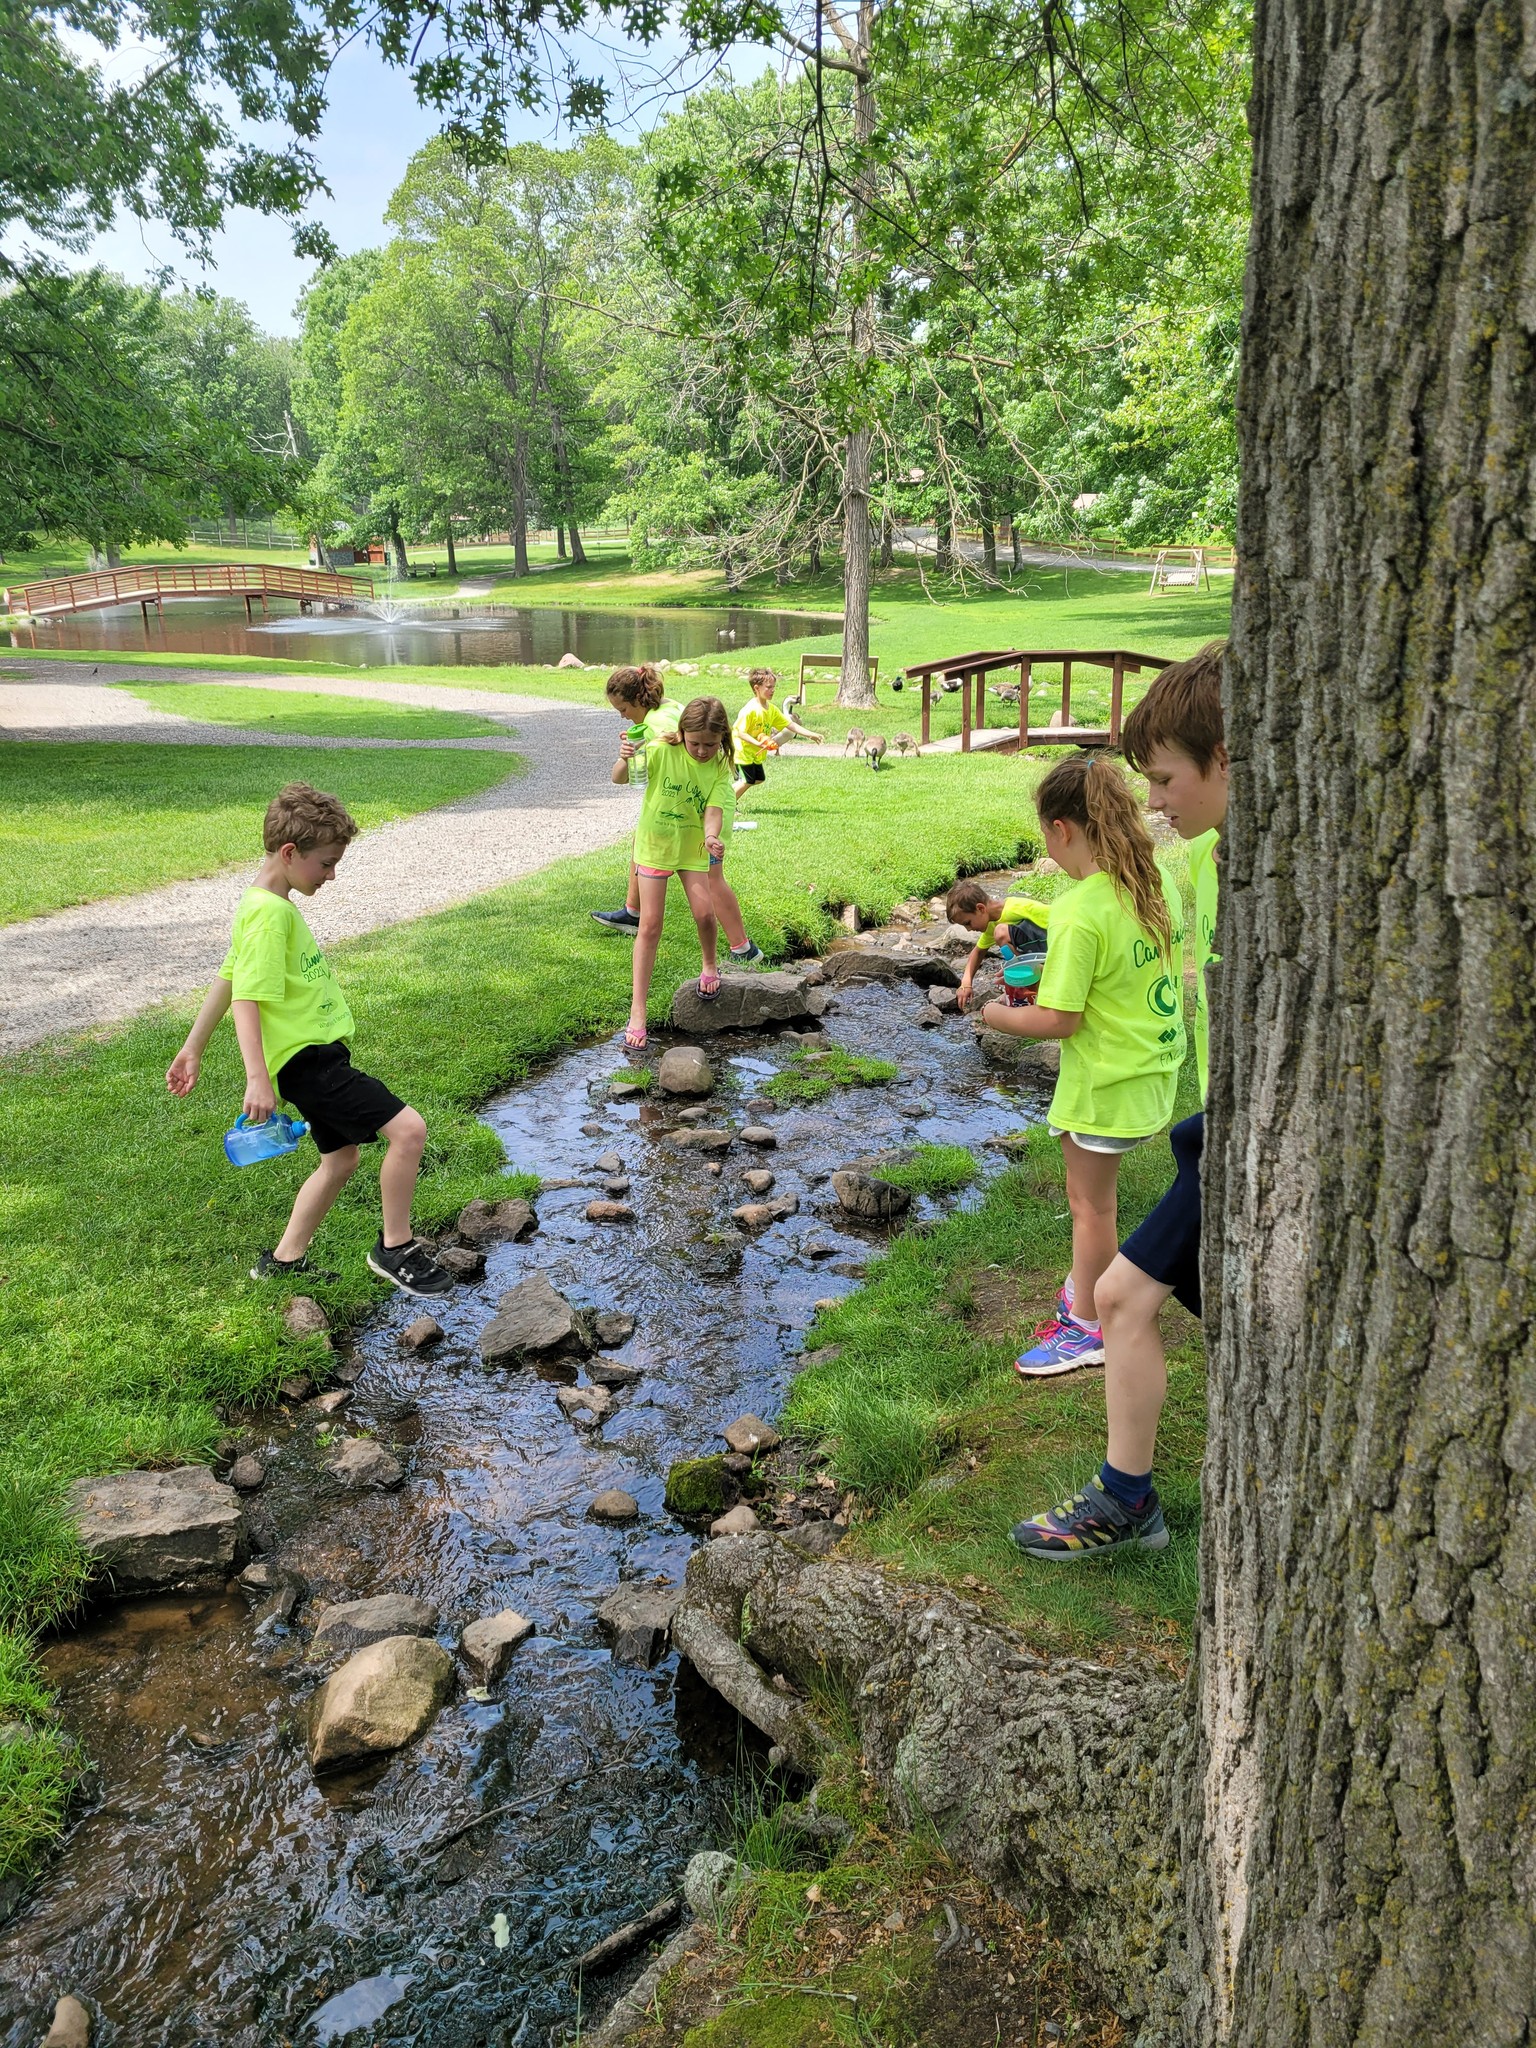 Children are playing near a shallow creek in a park